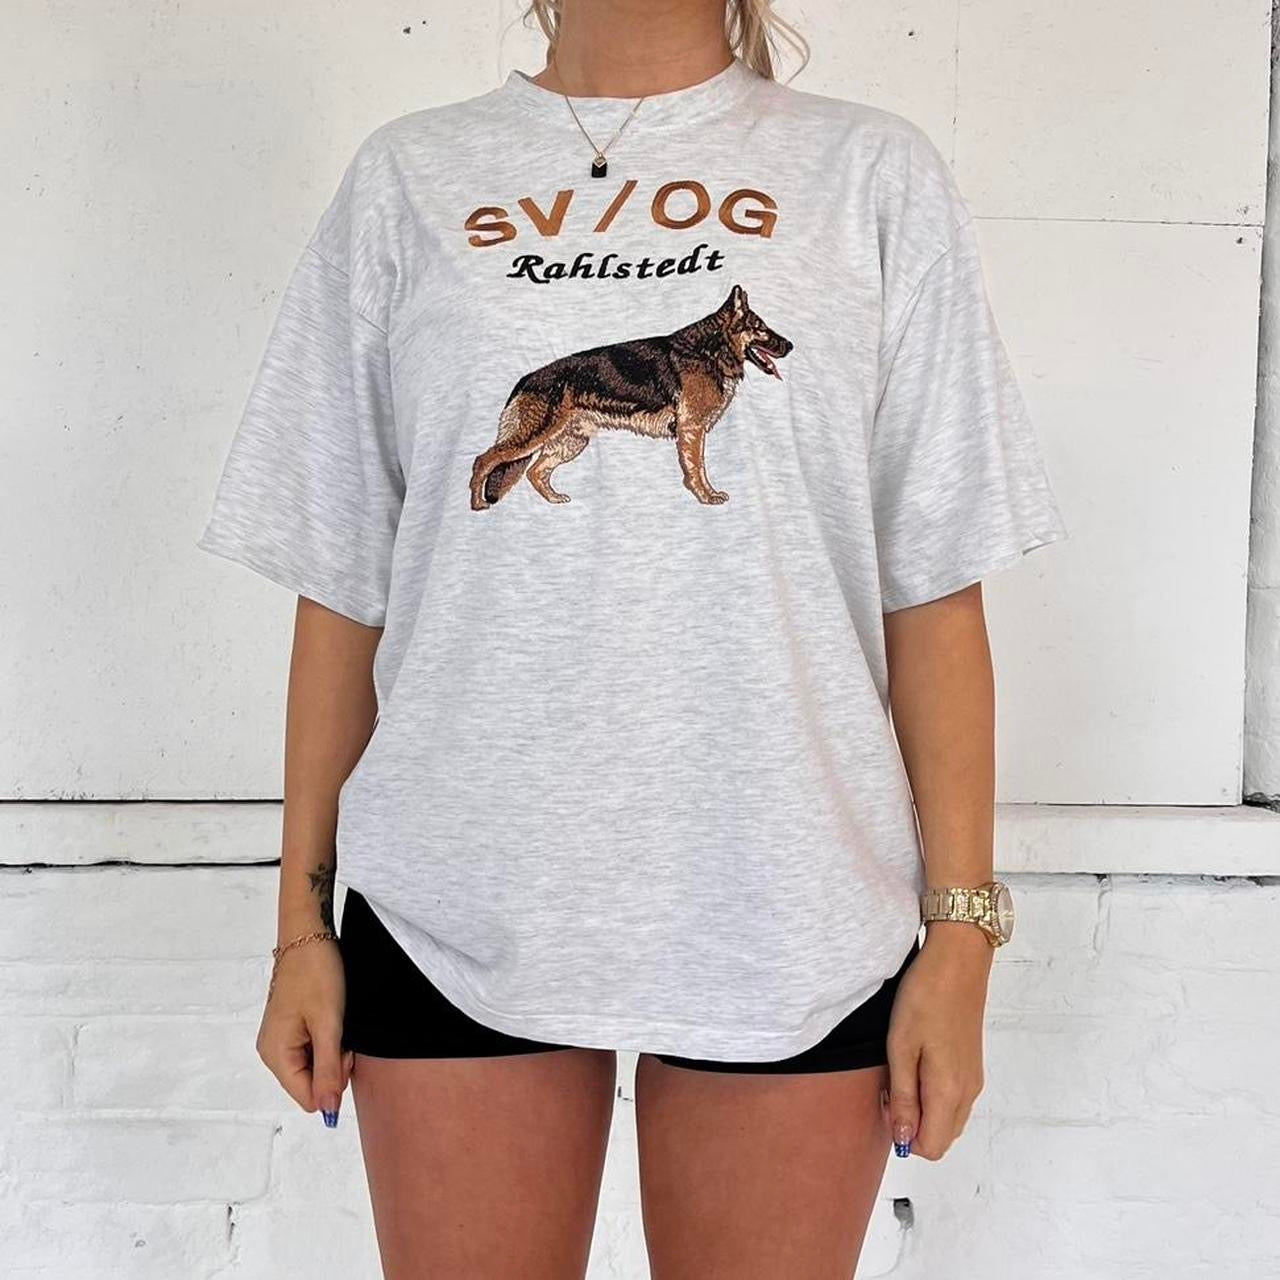 Vintage Embroidered Graphic Dog T-Shirt - L